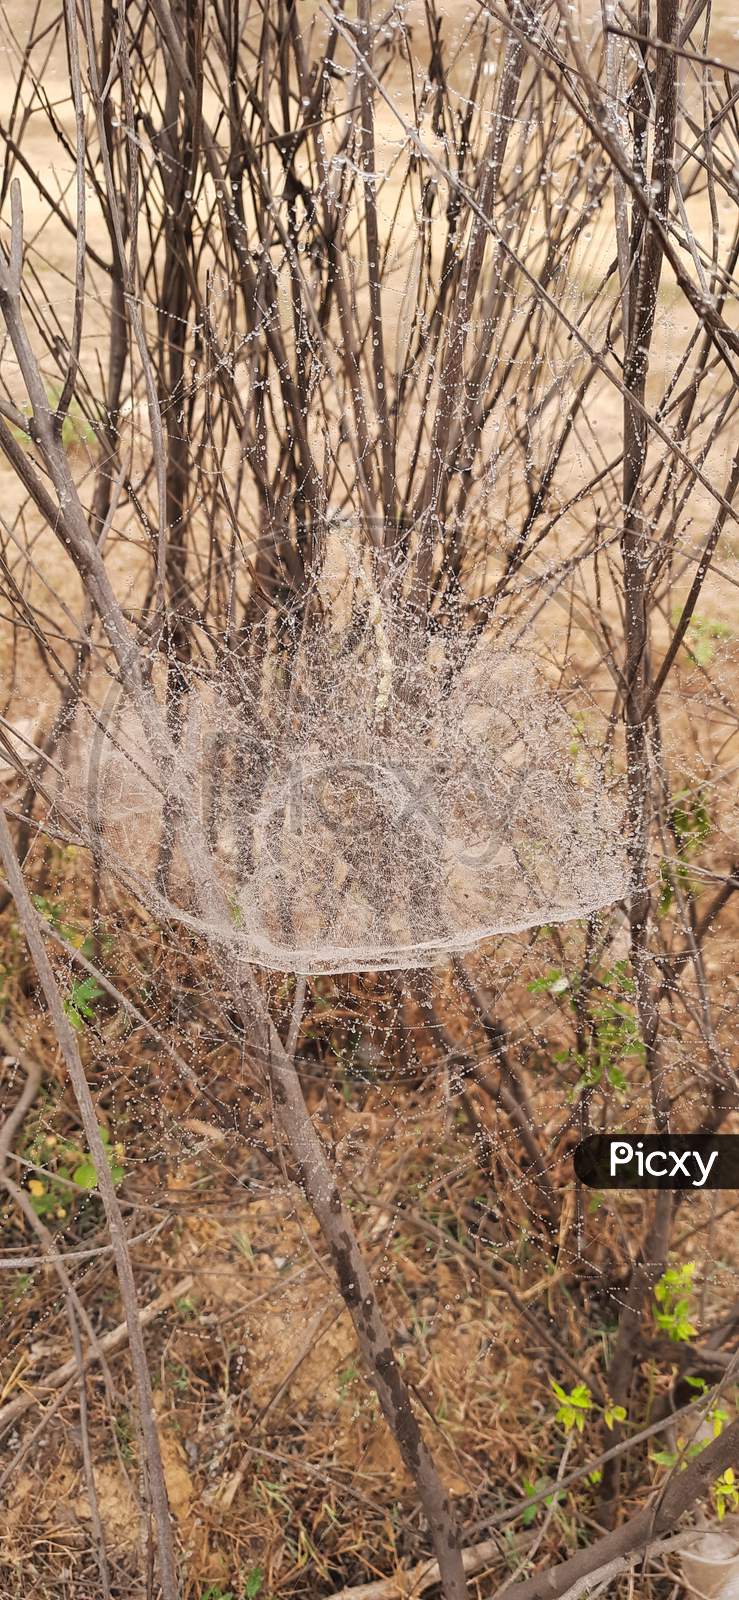 Spider Web in Curved Shape And its covered with Fog Drops, Natures Beauty in Spider Web